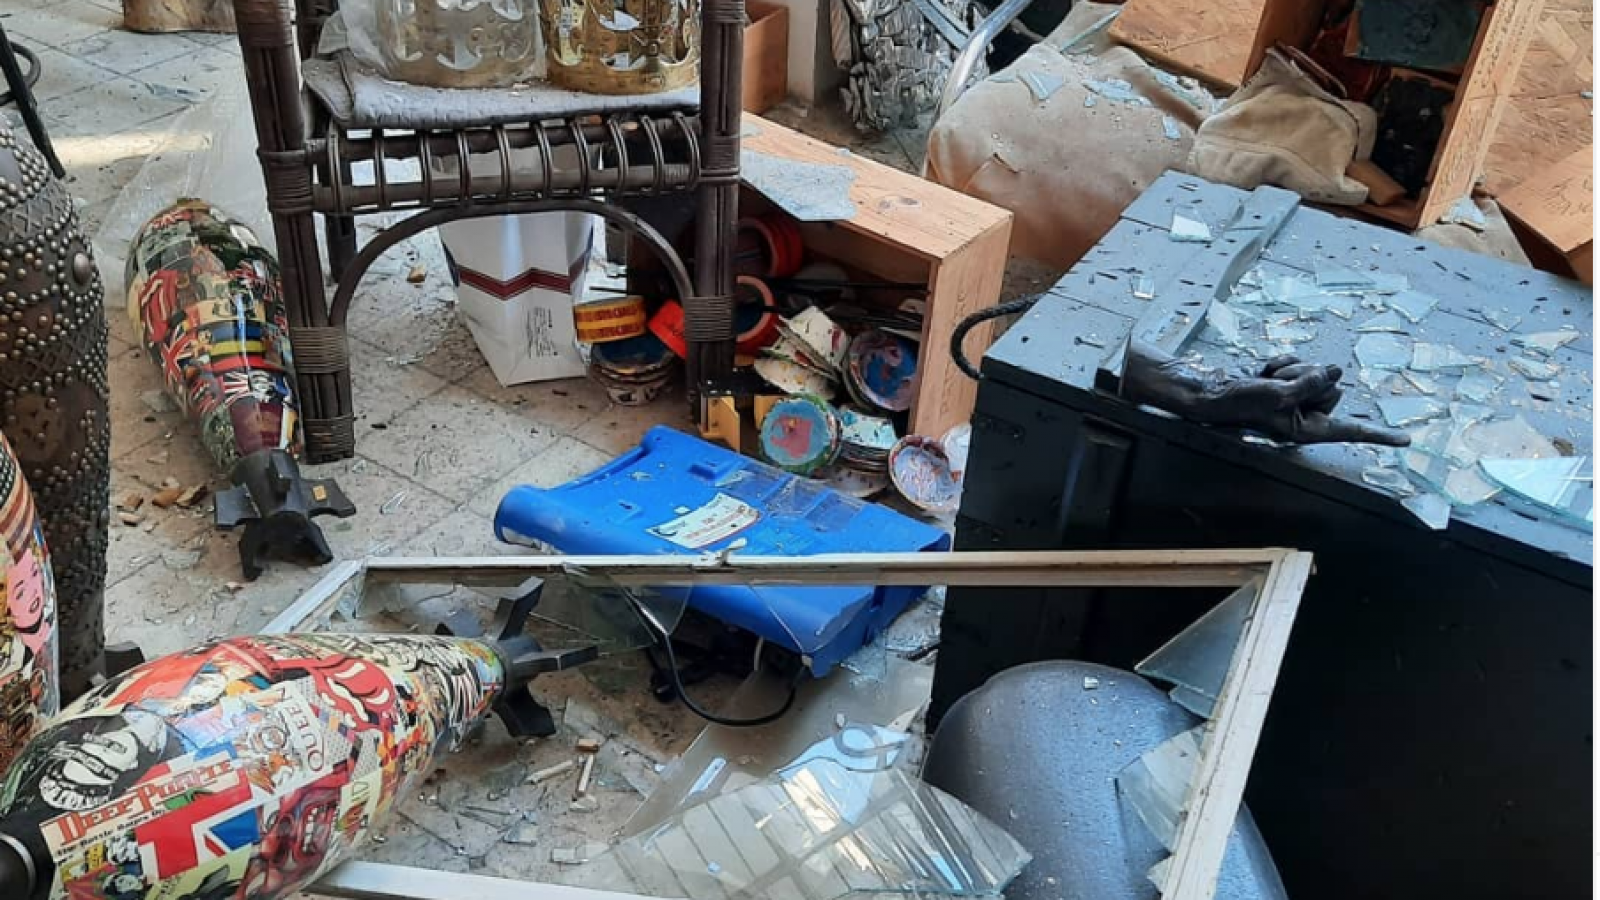 image of an art studio damaged by an explosion